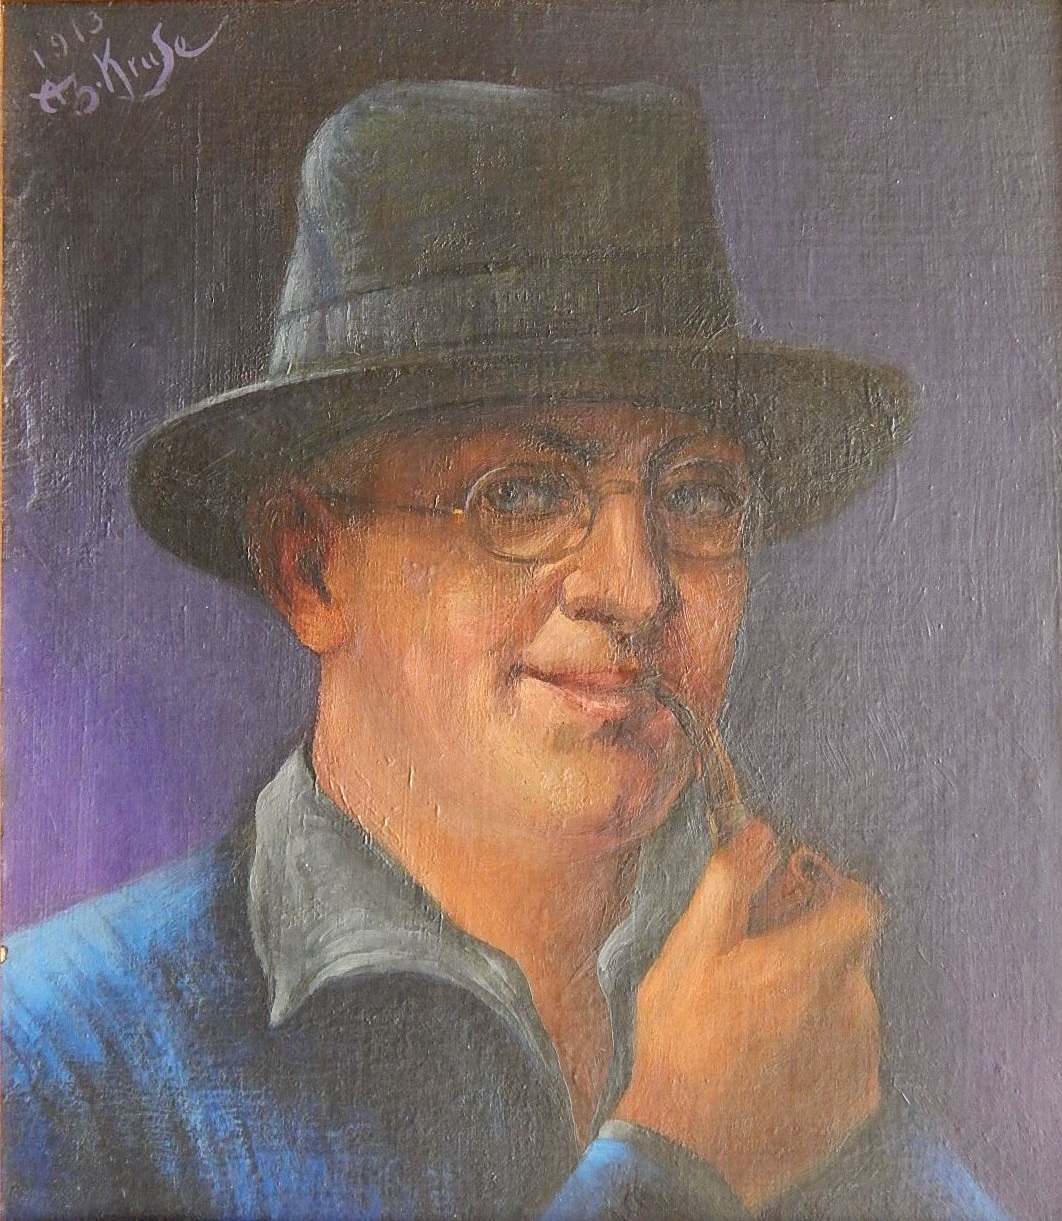 Painting of a man in glasses, black fedora, and blue shirt smoking a pipe